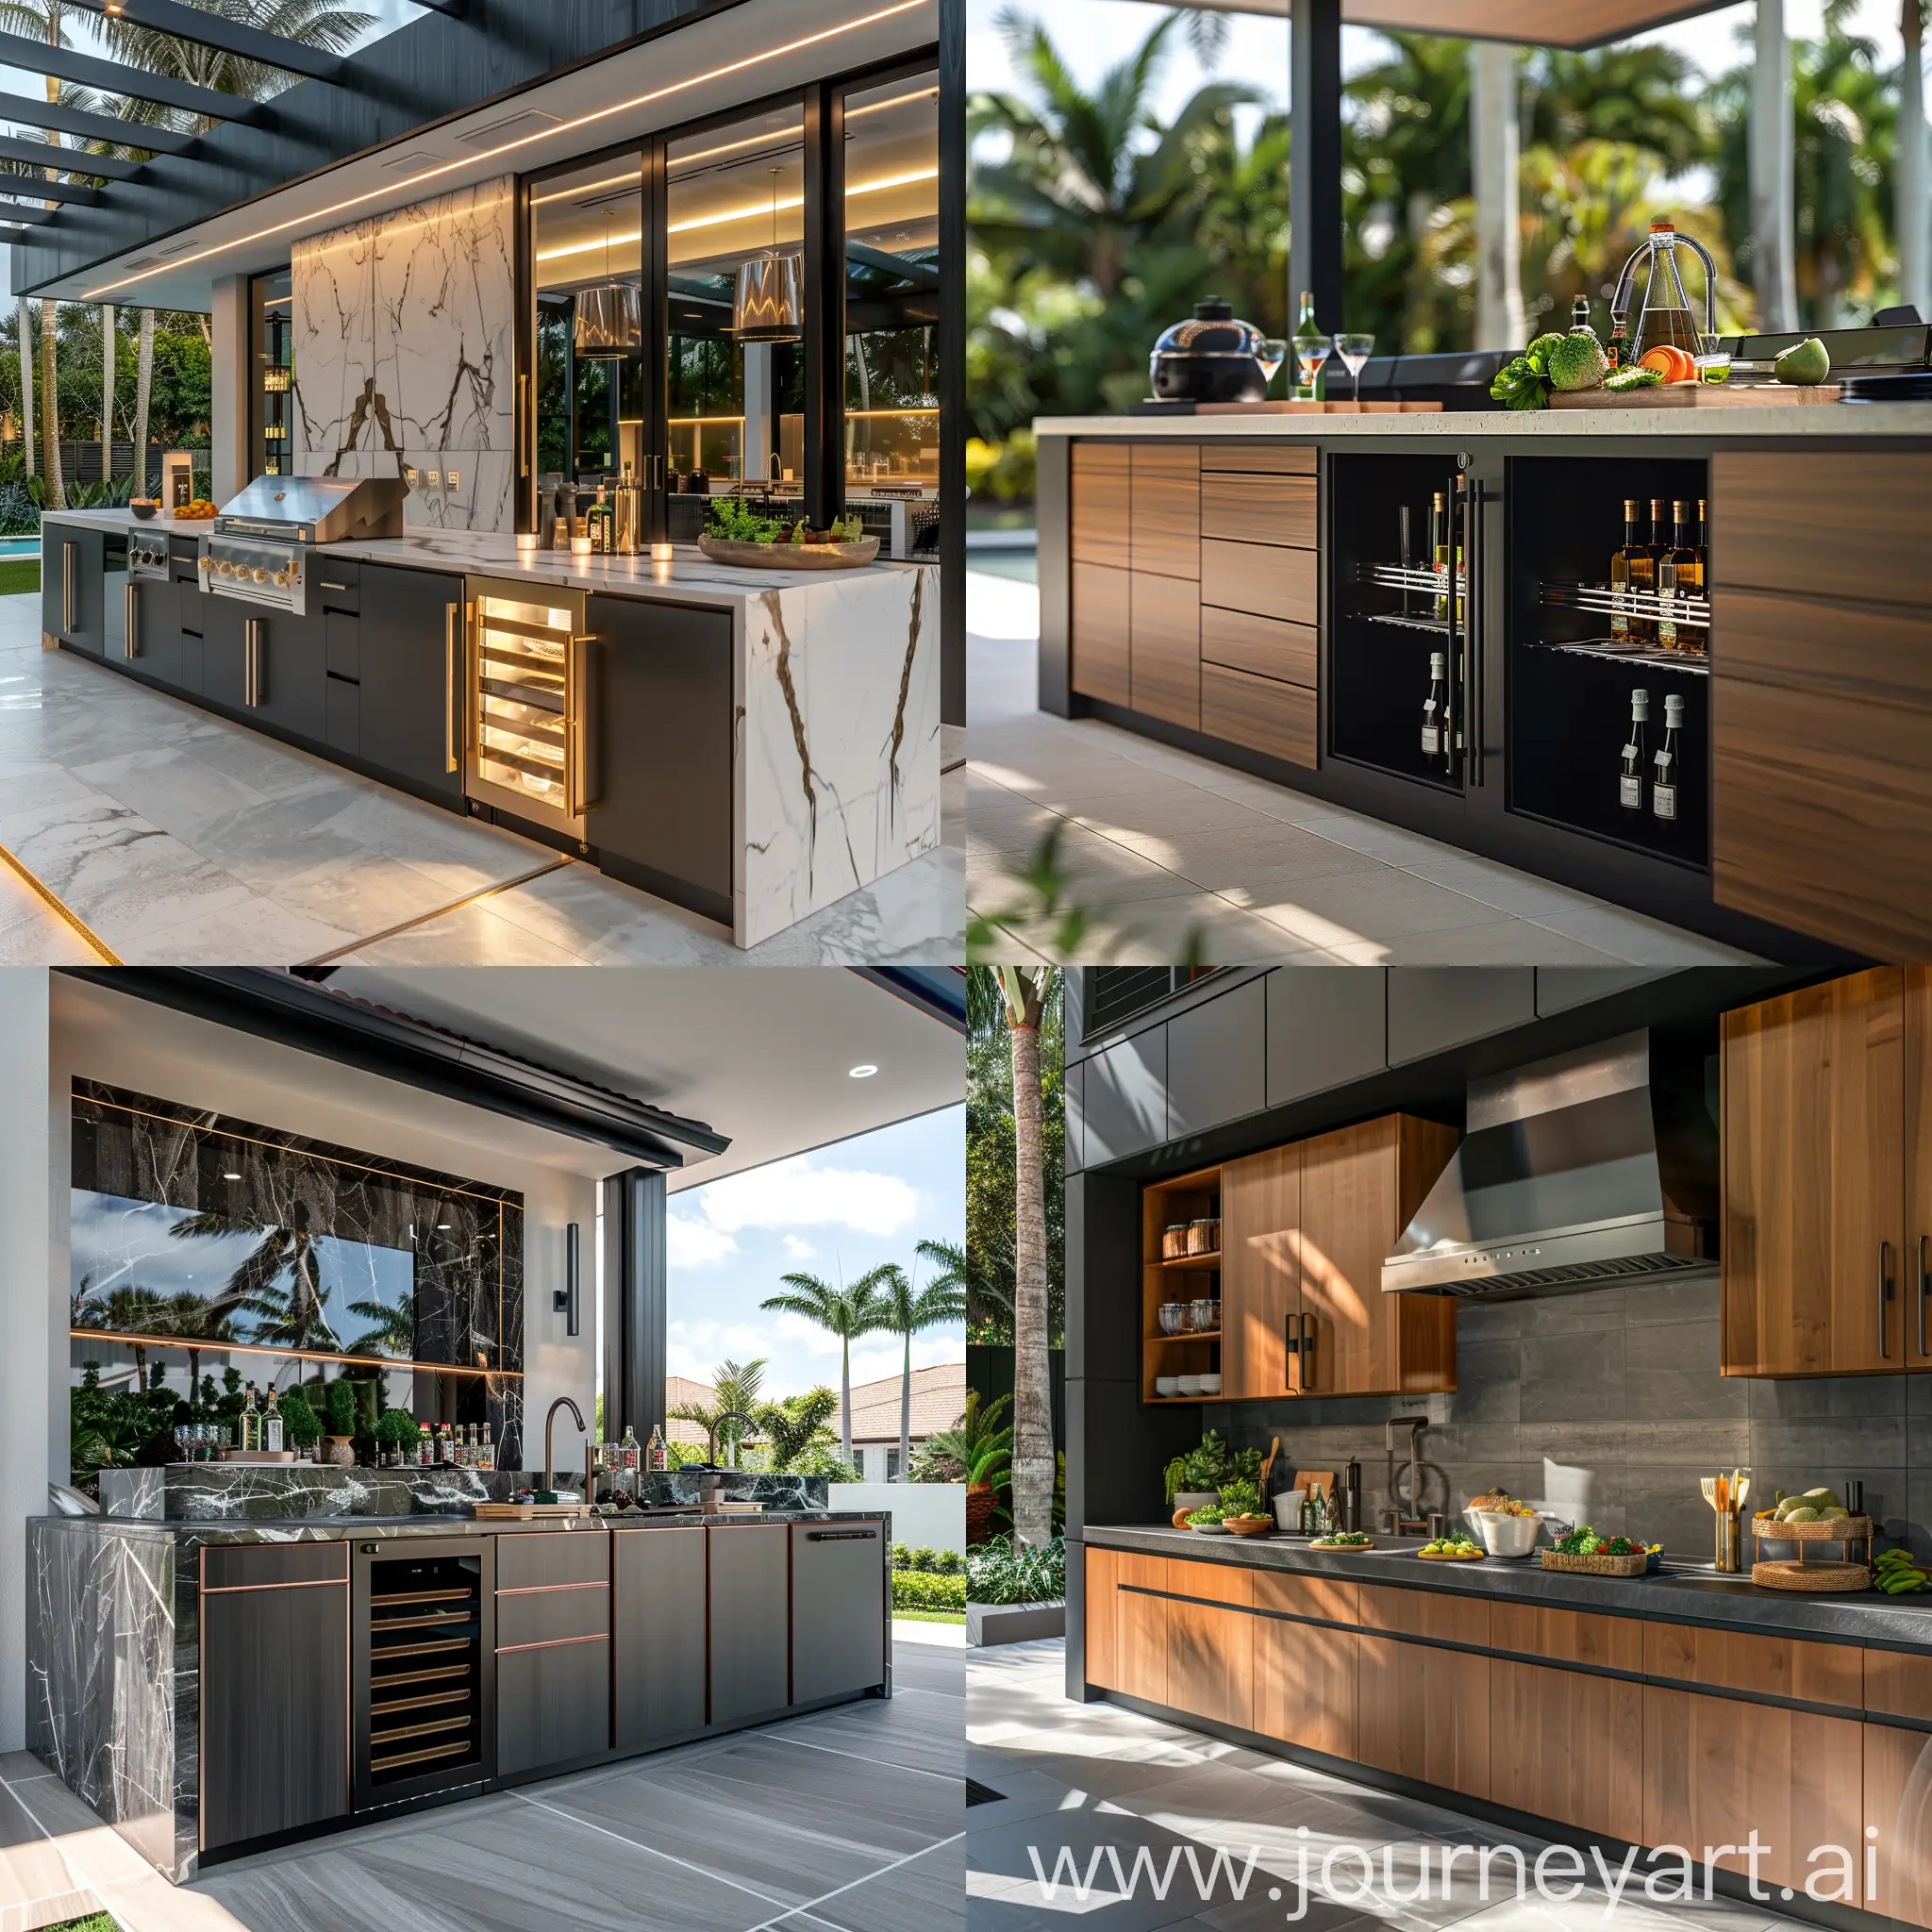 Luxurious-Modern-Outdoor-Kitchen-Cabinets-in-Florida-HighQuality-Photorealistic-Image